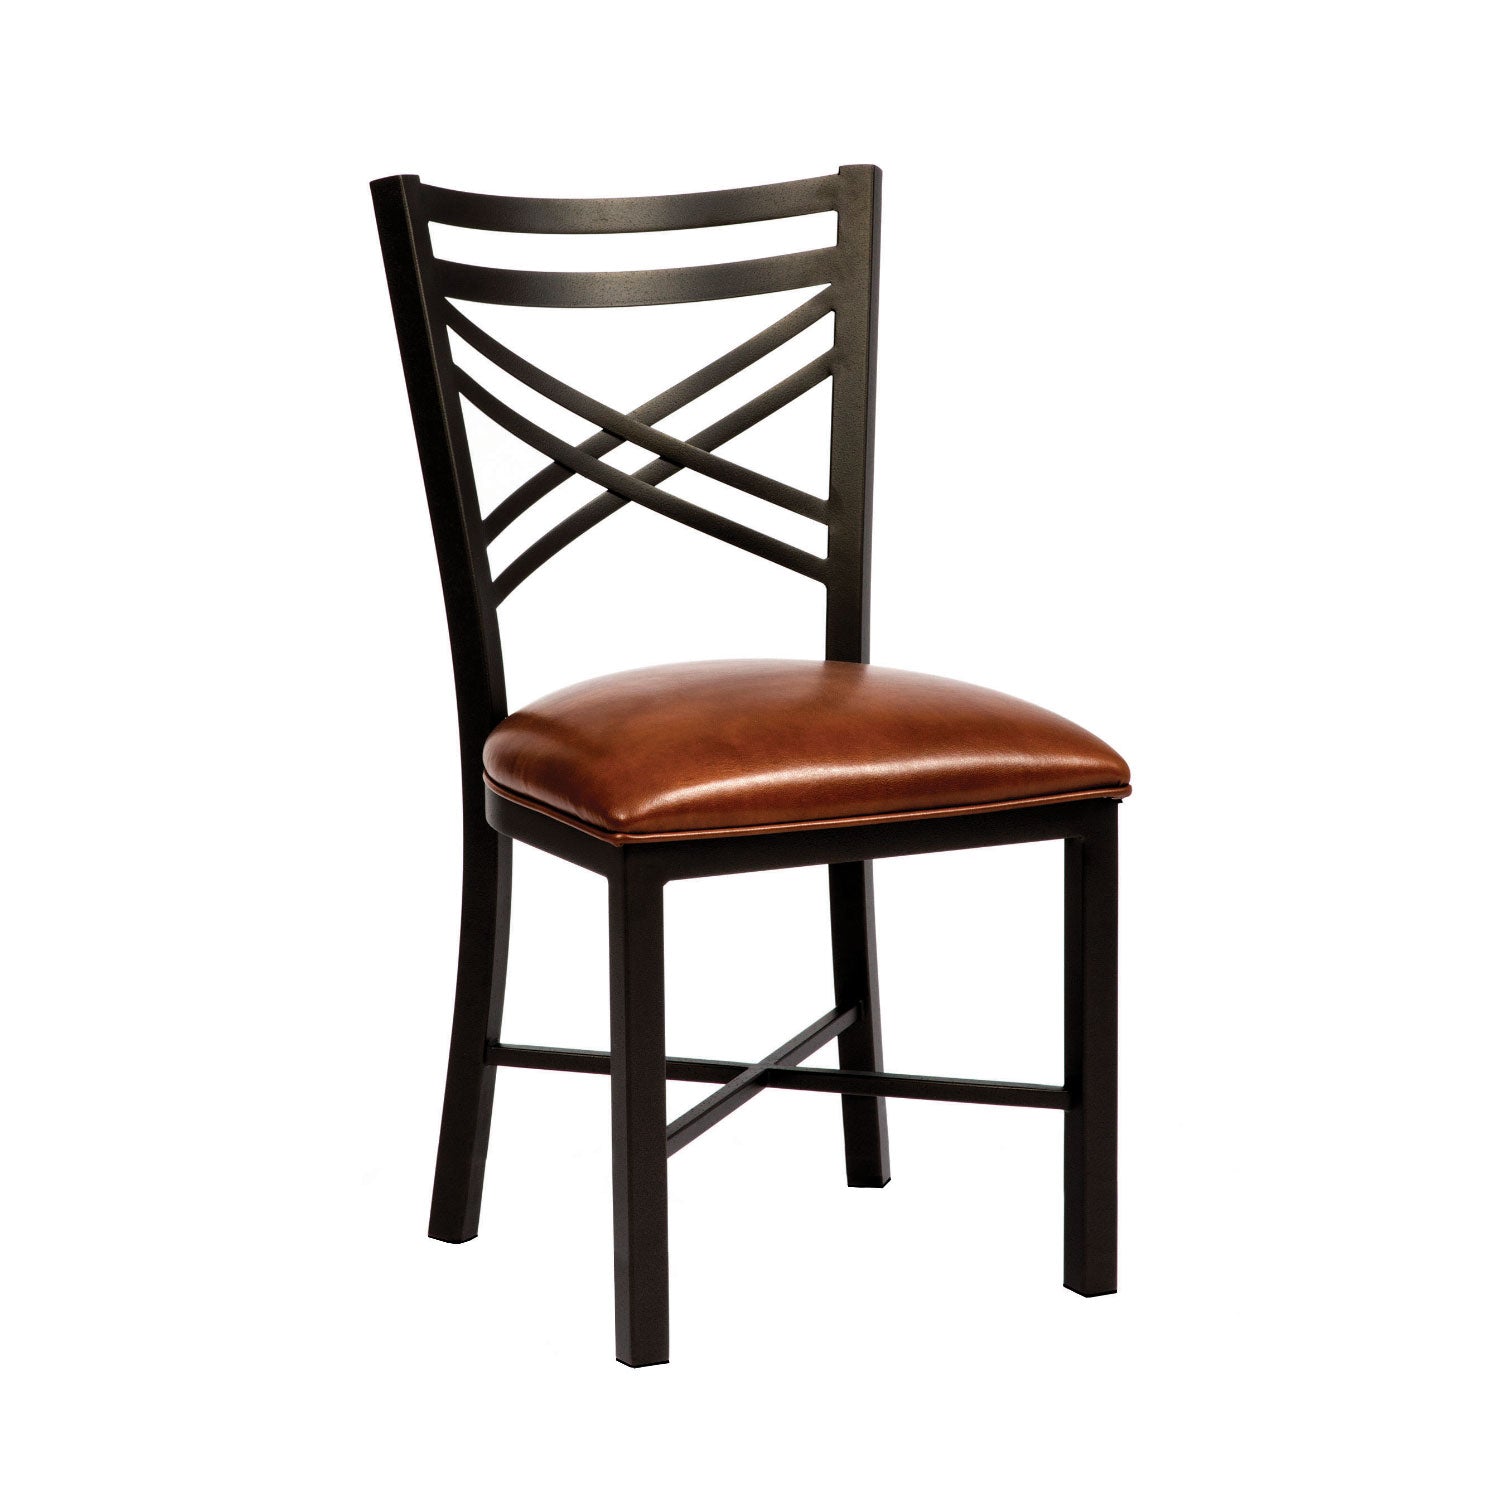 Wesley Allen Raleigh Chair with Yosemite Chestnut Vinyl and a Matte Black Finish.